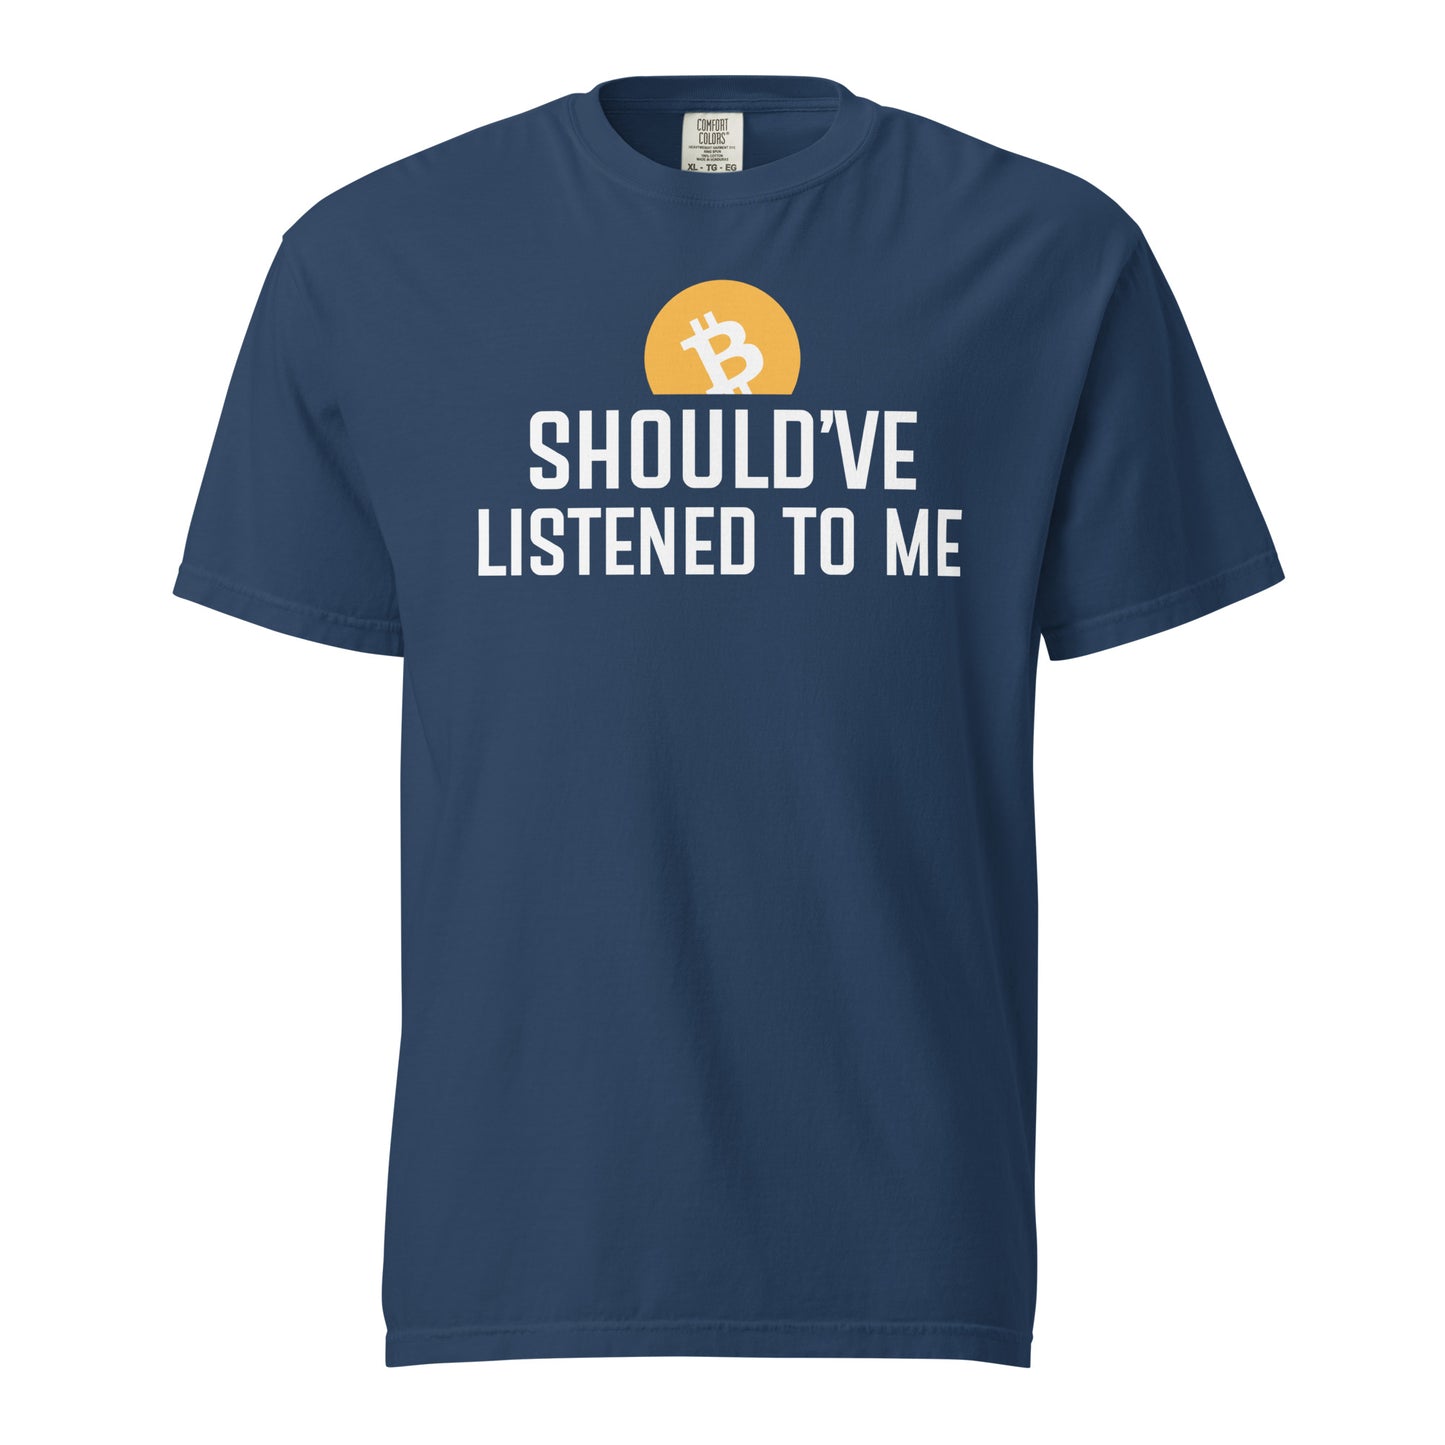 Should've listened to me heavyweight t-shirt